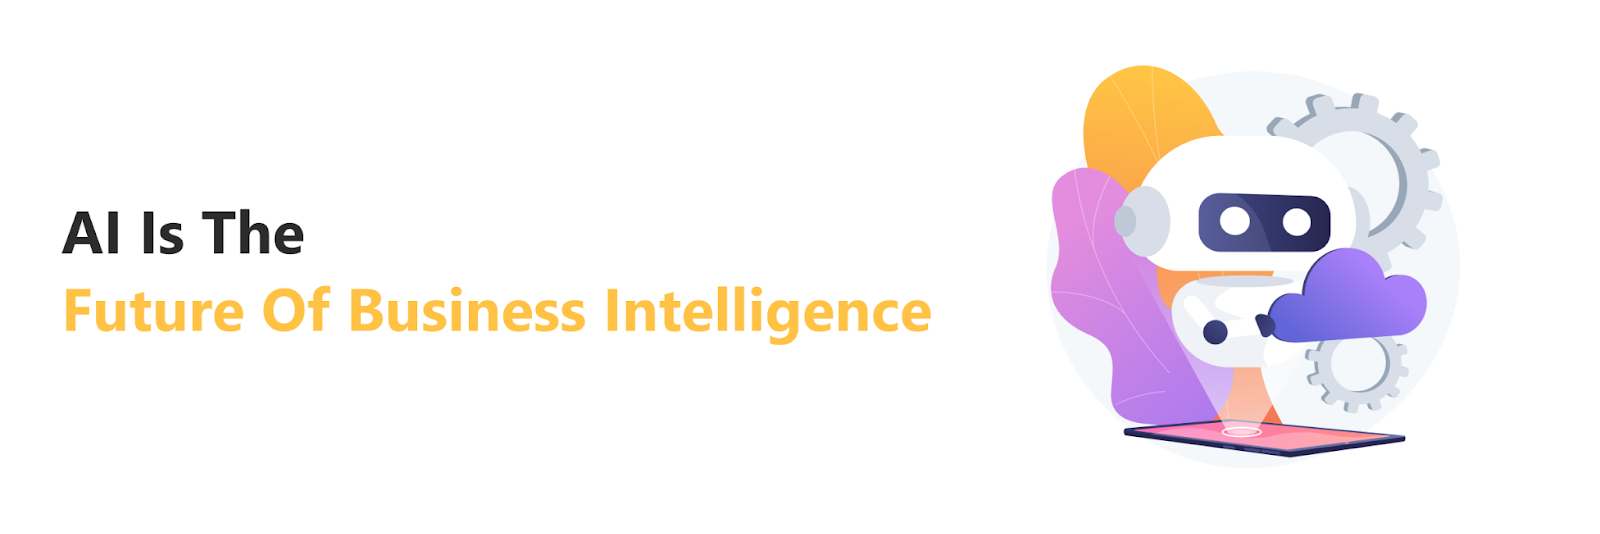 AI is the Future of Business Intelligence